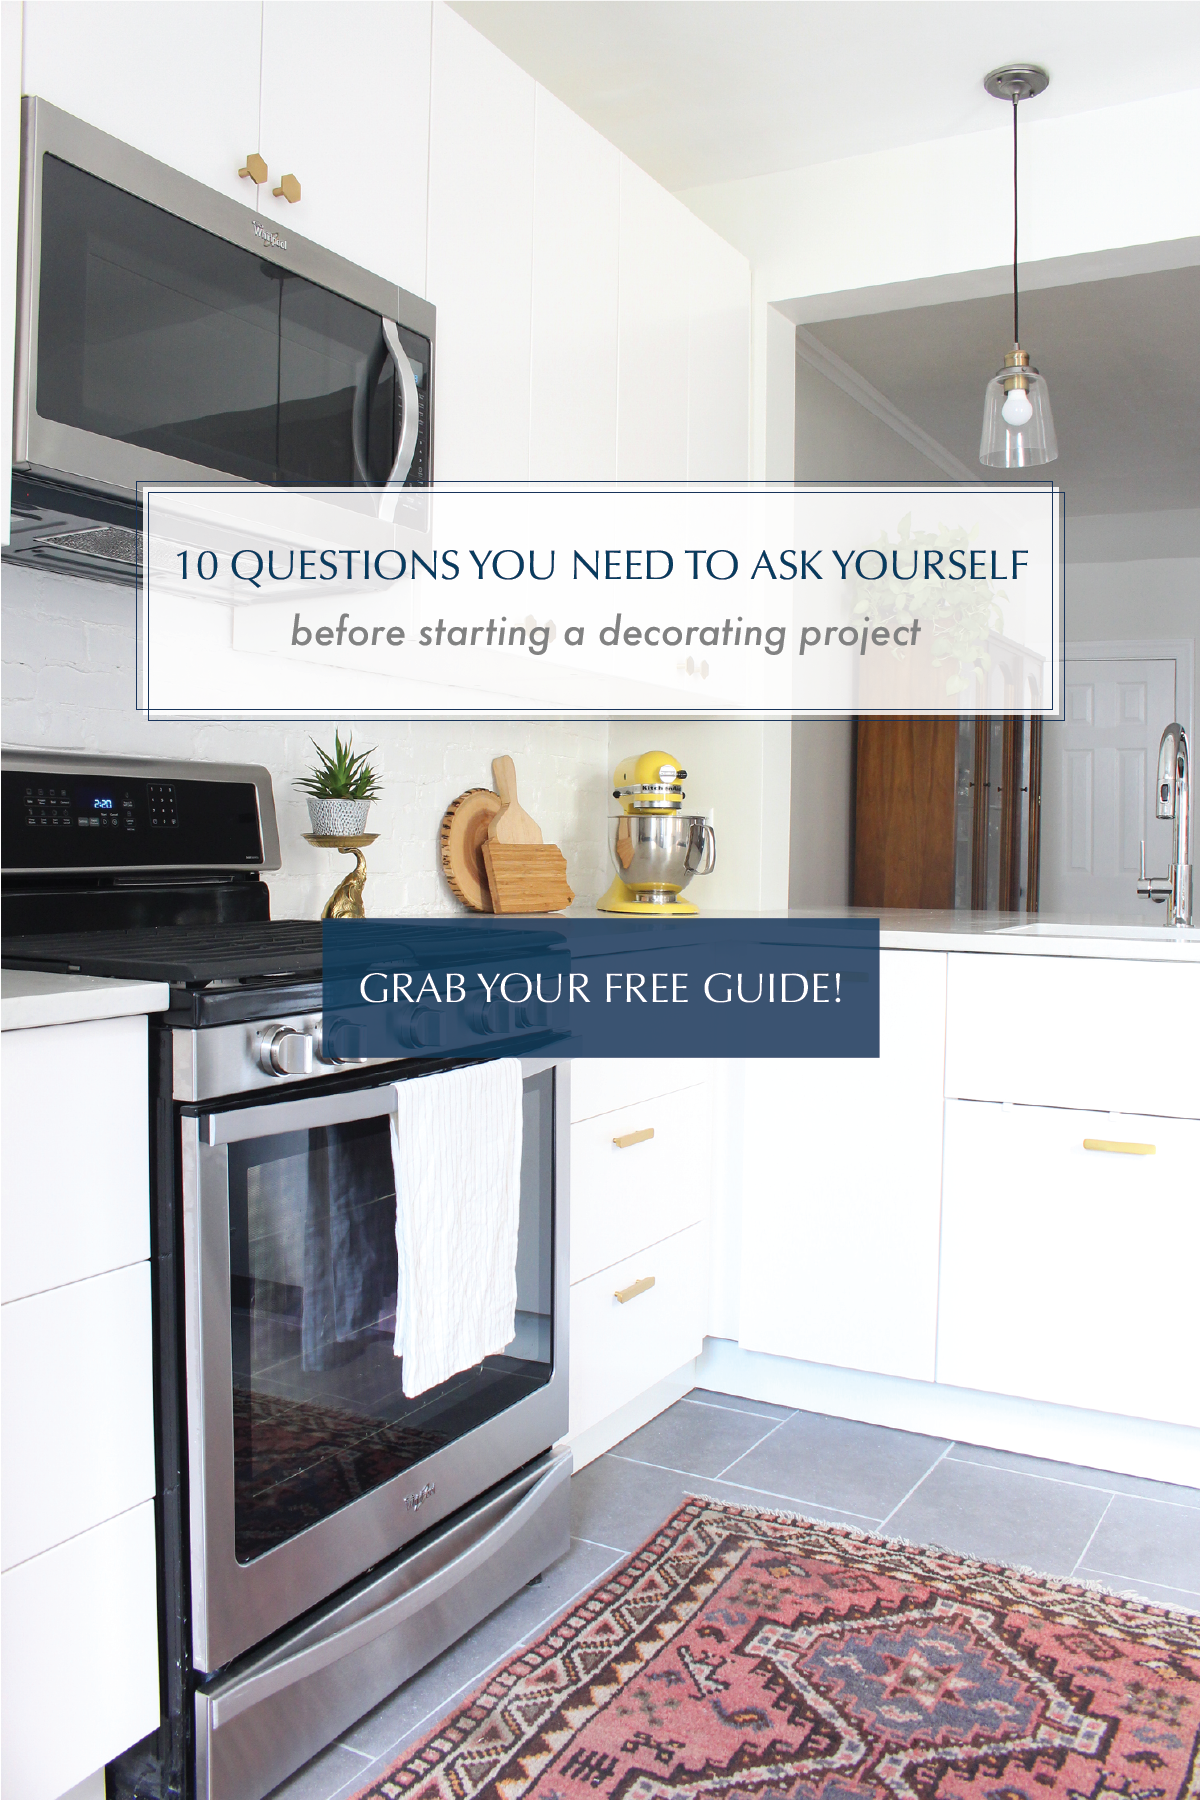 Six Questions You Should Ask Yourself Before Starting Your Wall